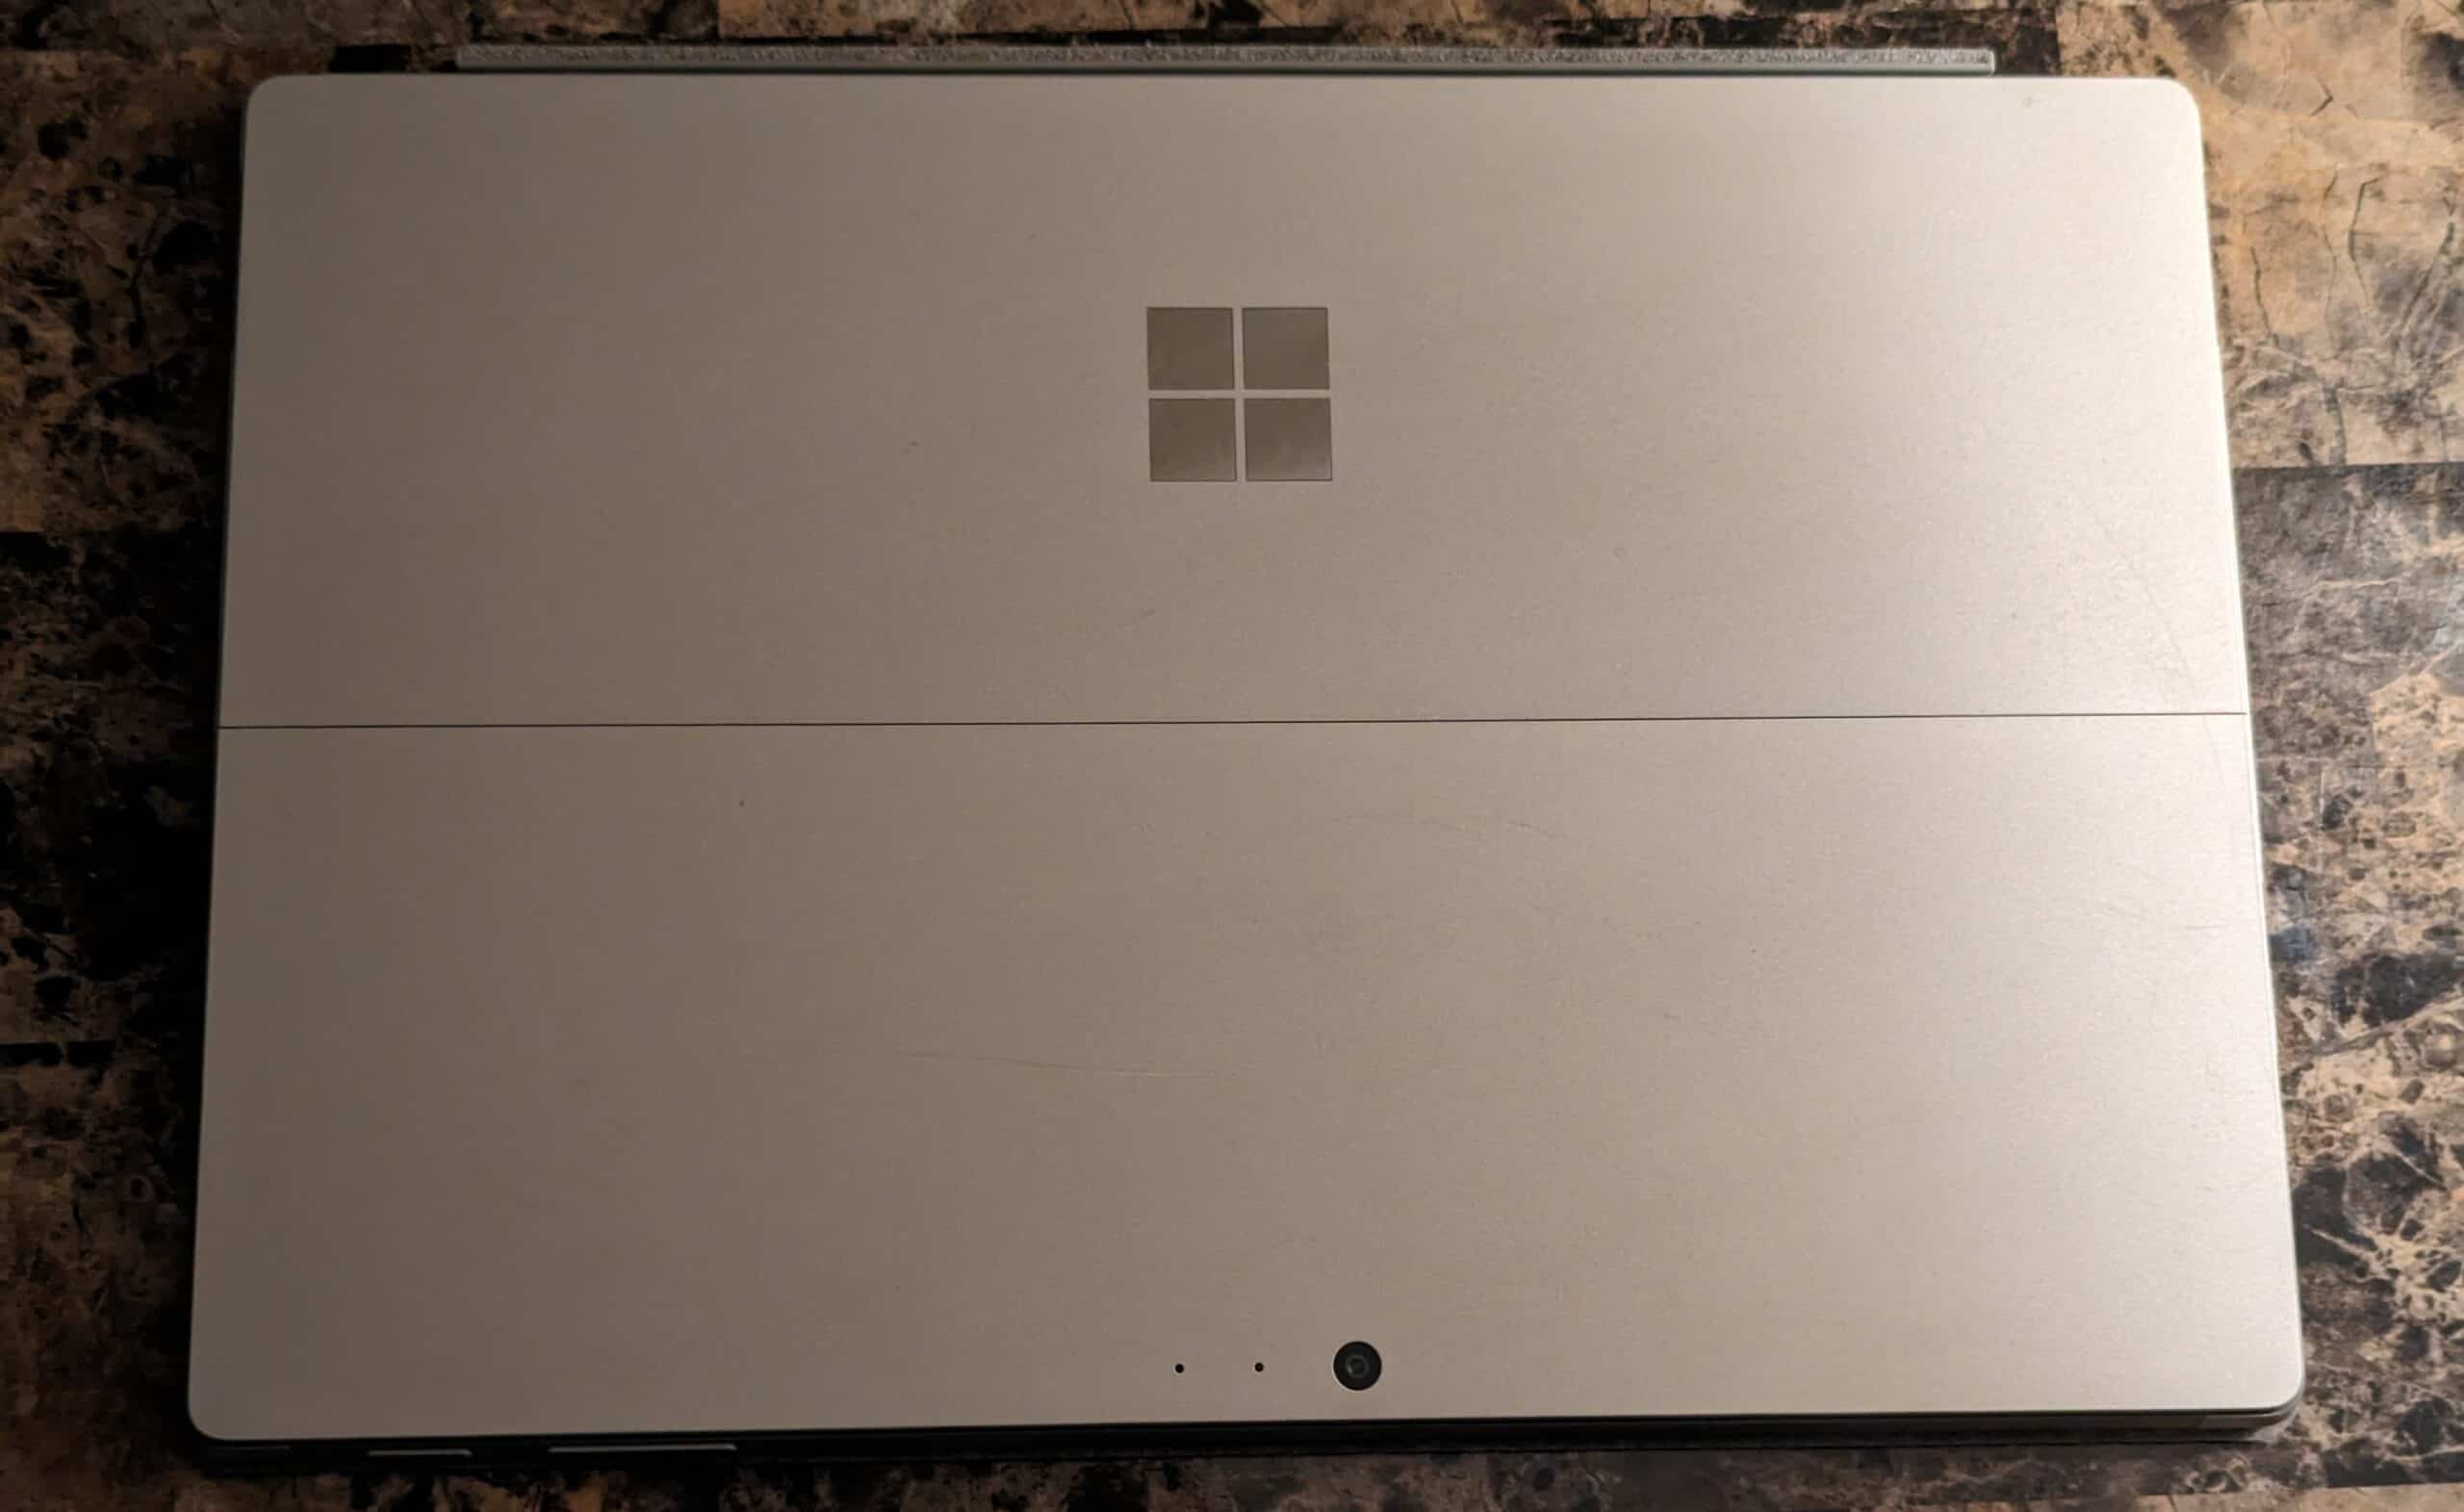 Featured Image for the Surface Pro article. Surface Pro 6 laying on a table.